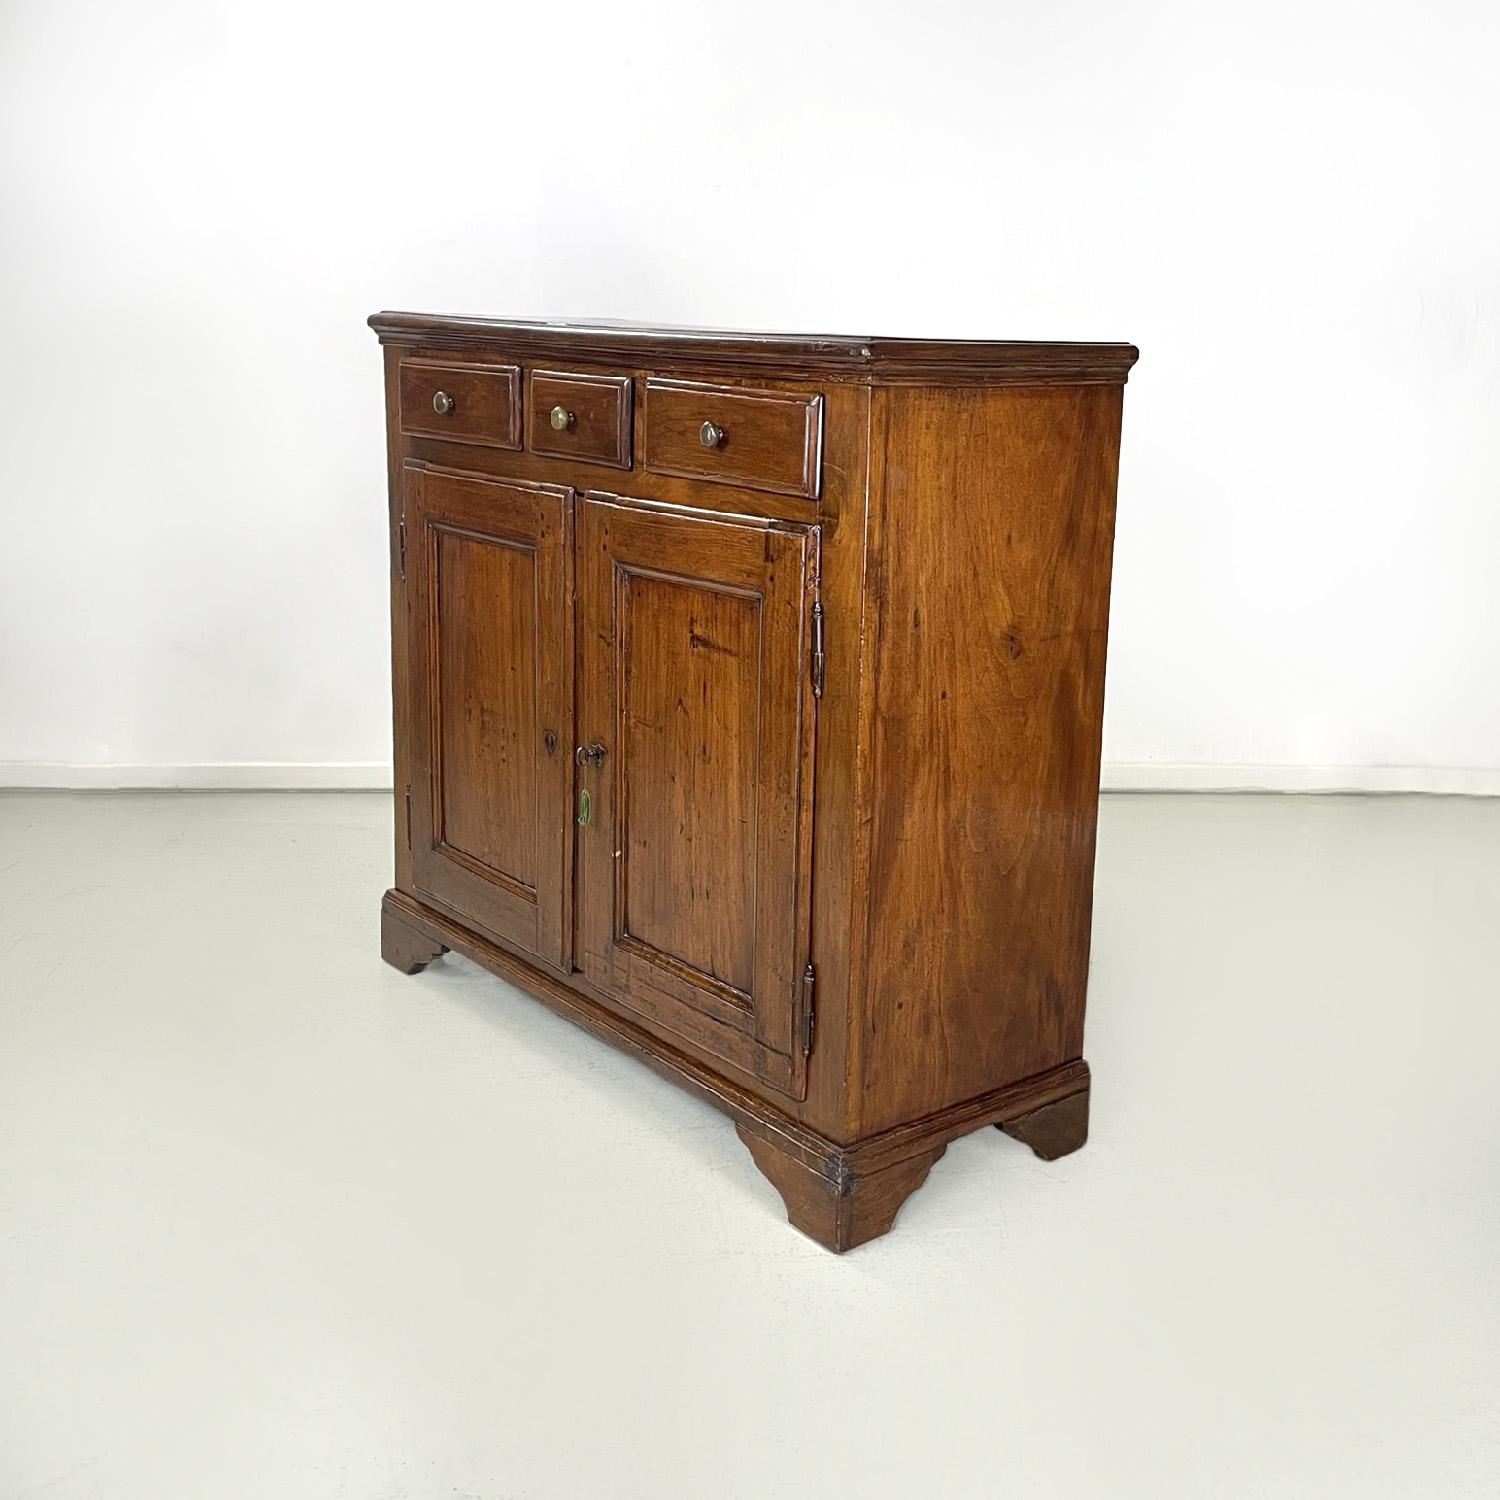 Italian wooden sideboard with three drawers and two doors, 1900s
Sideboard with rectangular base entirely in wood. It has a top with shaped perimeter sides, underneath there are three drawers, the smaller central one with round brass knobs. In the